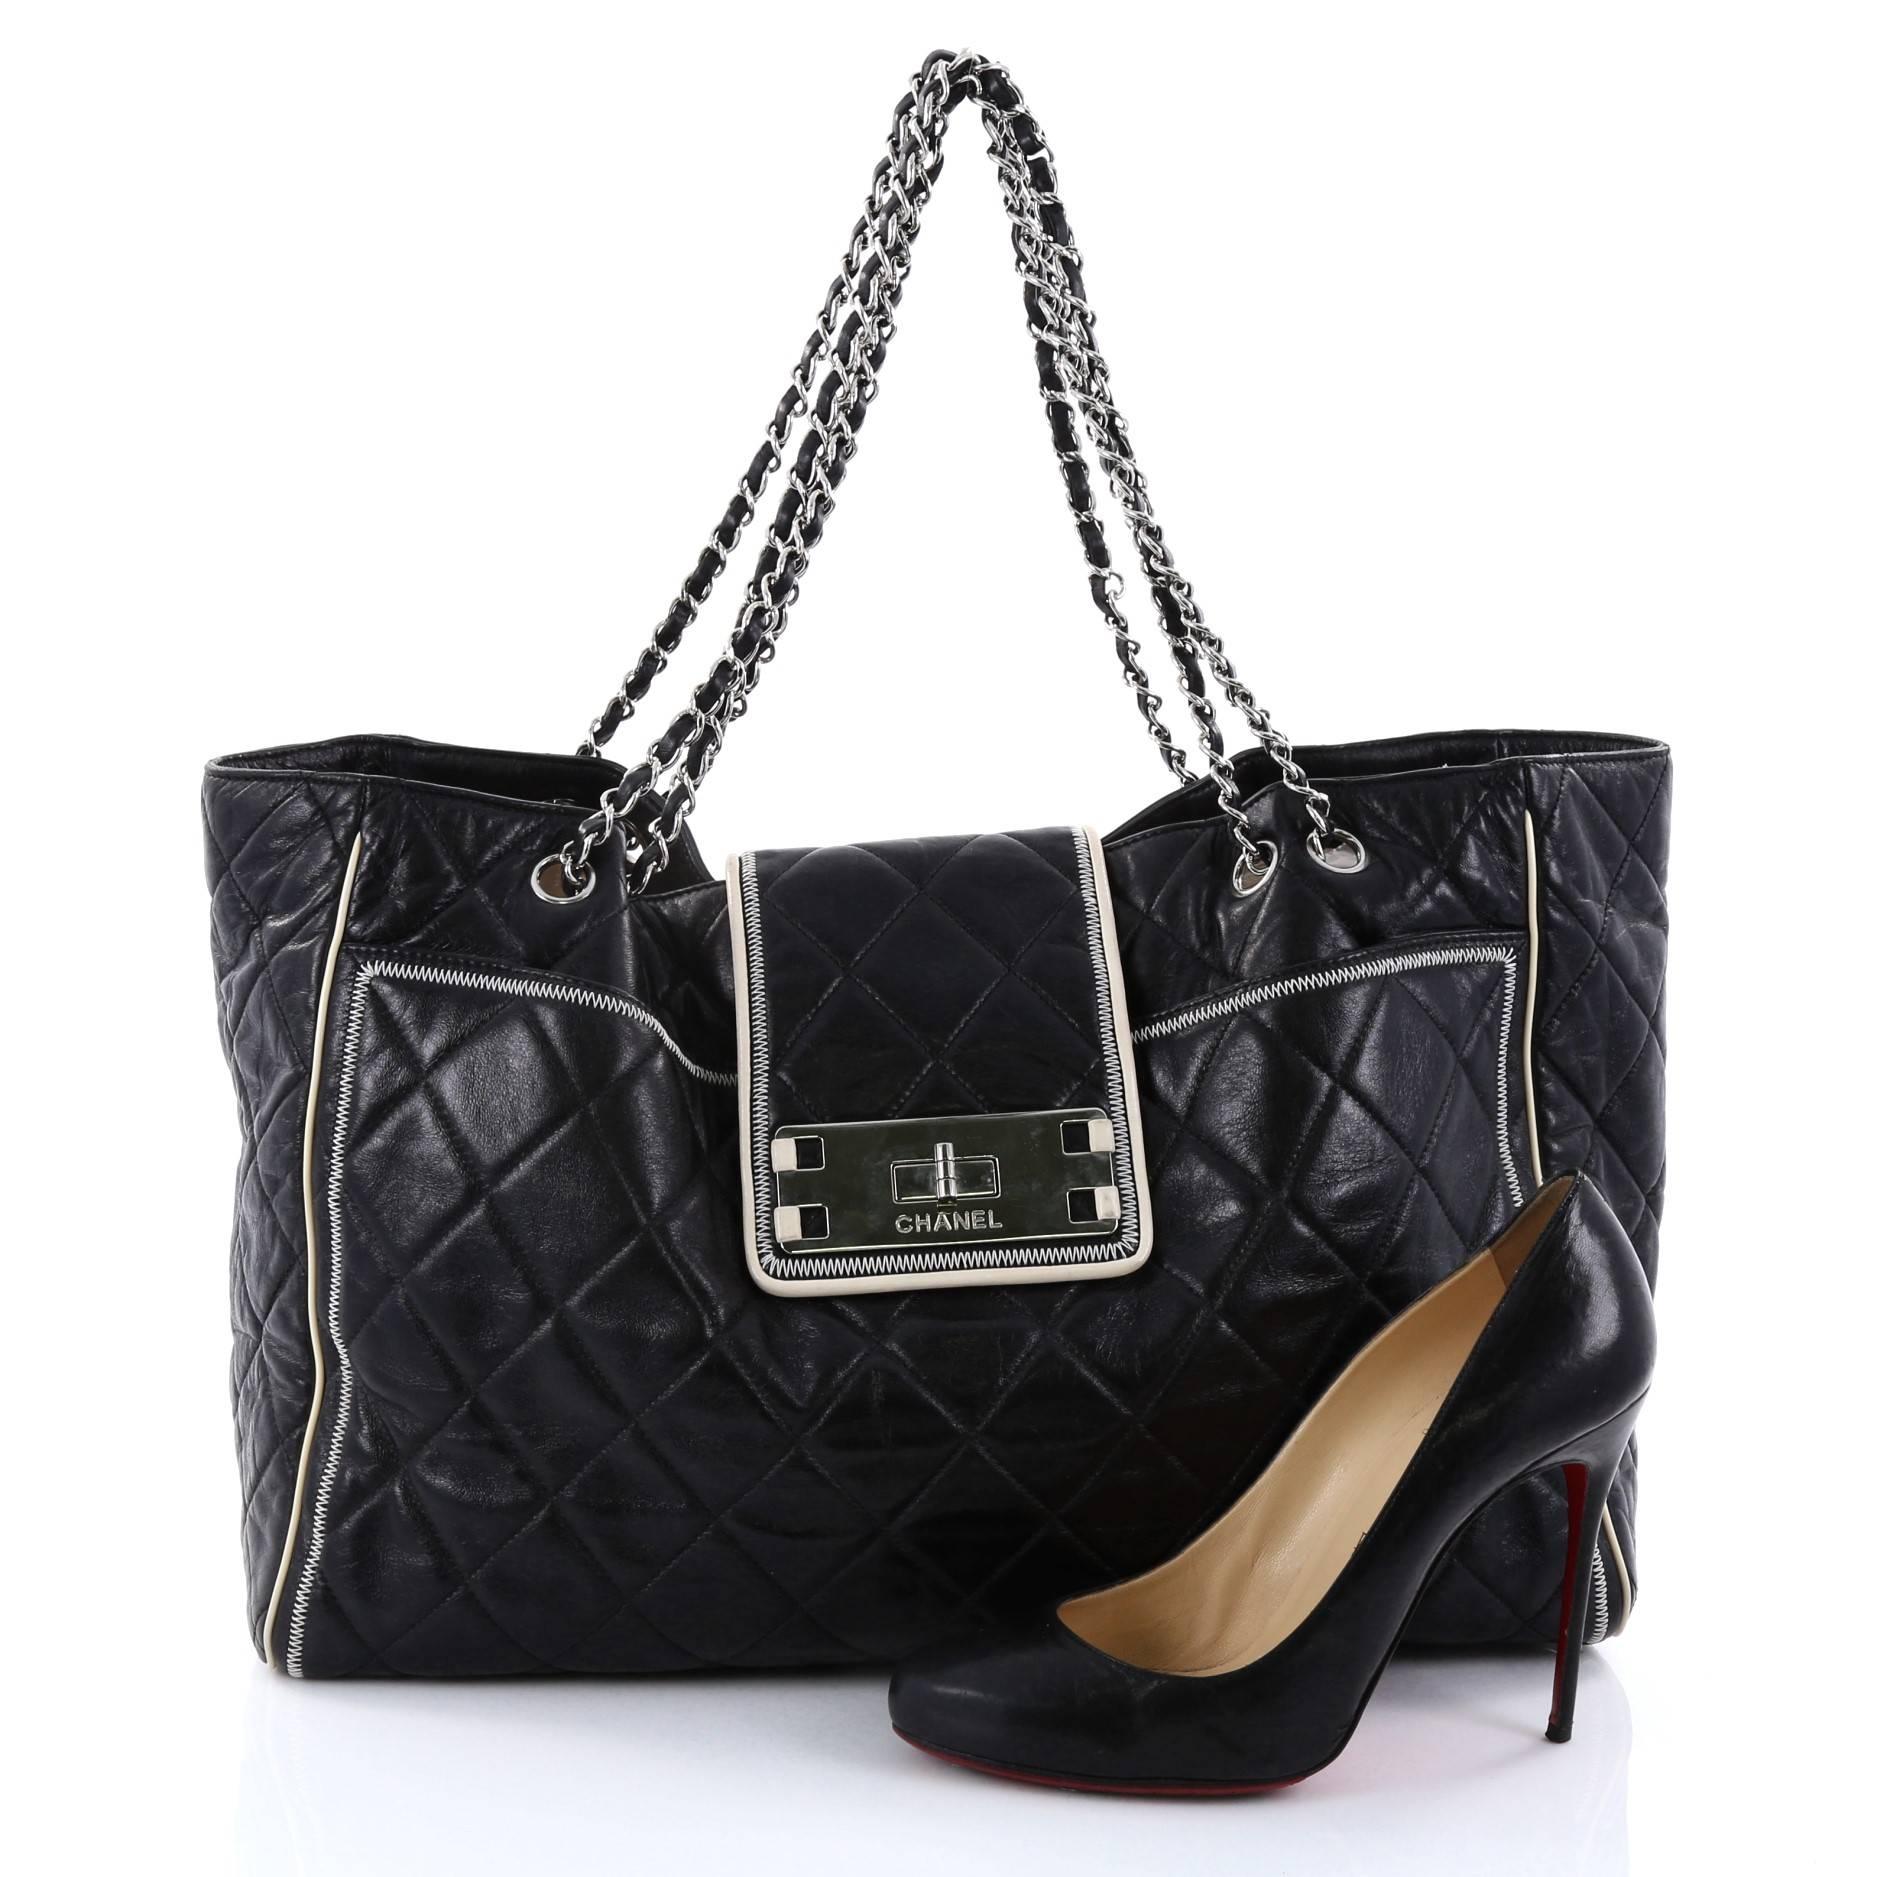 This authentic Chanel Mademoiselle Lock East West Tote Quilted Leather Large is an elegant, classic bag that every fashionista needs in her wardrobe. Crafted from black diamond quilted leather with cream leather trims, this oversized tote features